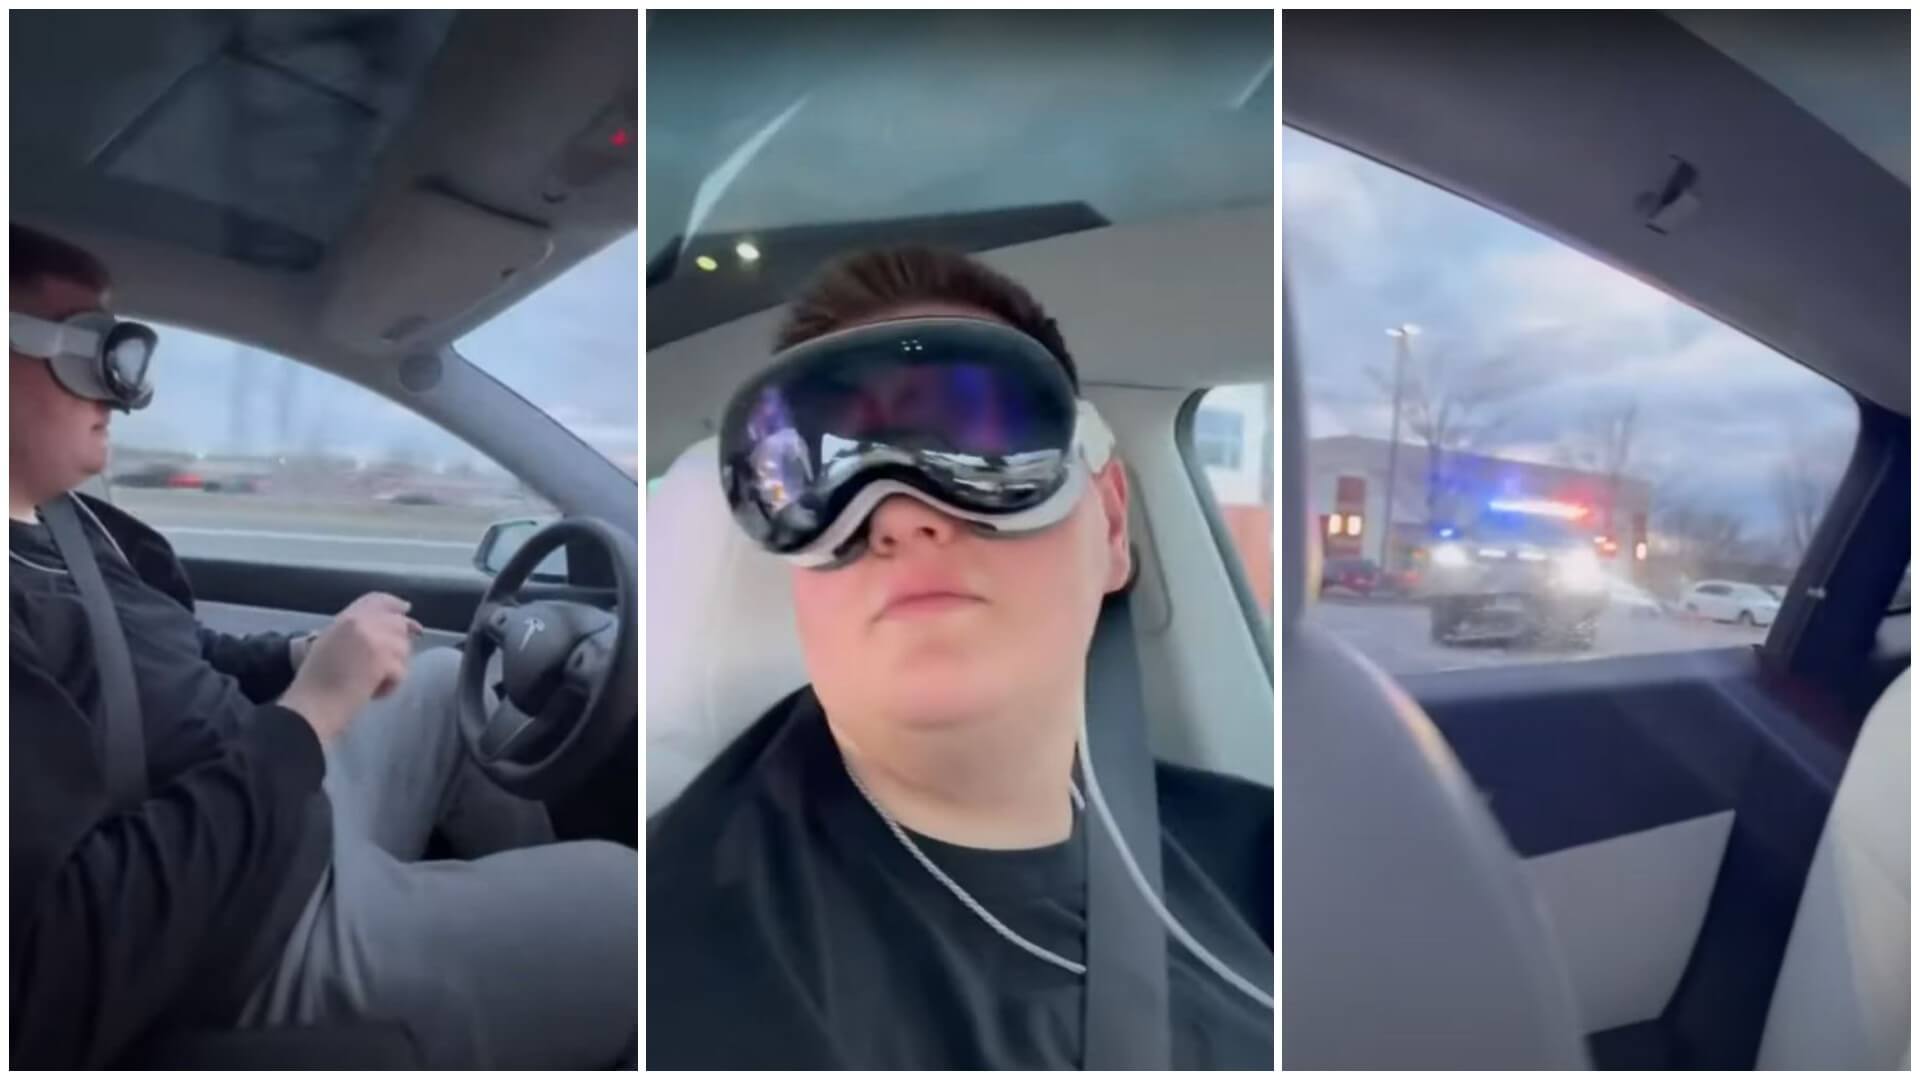 Tesla Owners Warned Against Wearing Apple VR Headsets While Driving